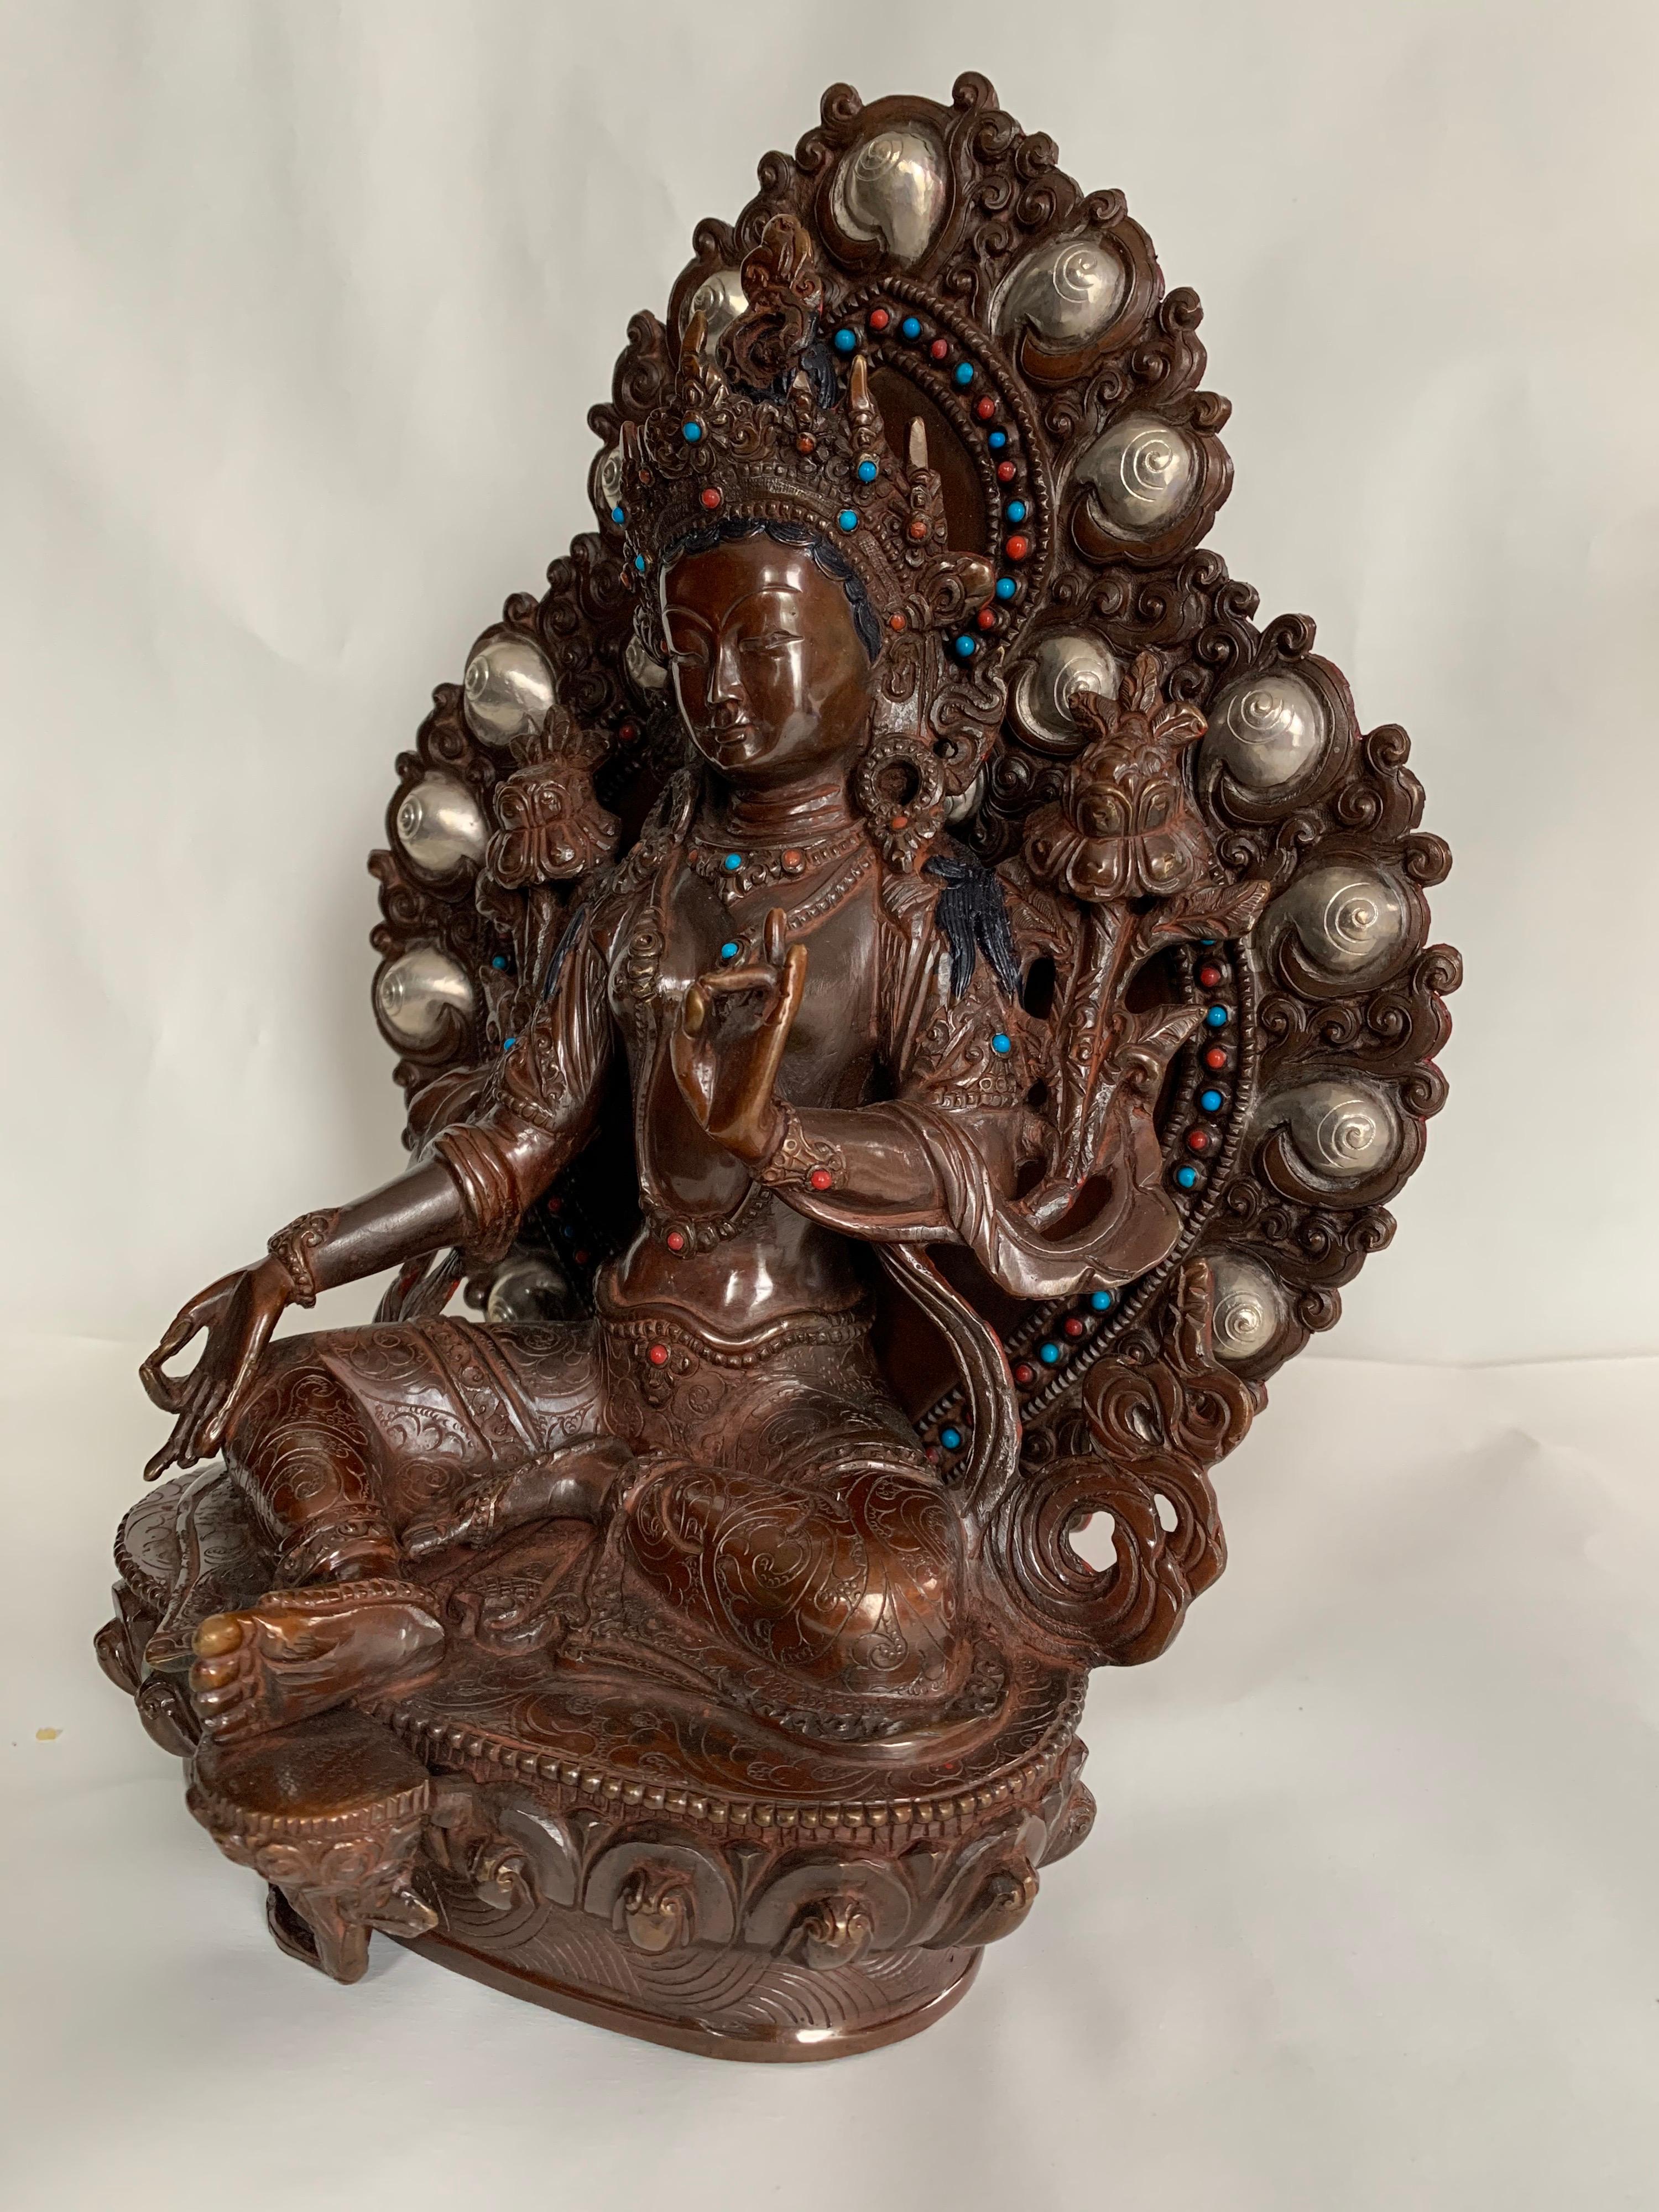 Green Tara Statue 10 Inch with Silver Handcrafted by Lost Wax Process - Sculpture by Unknown